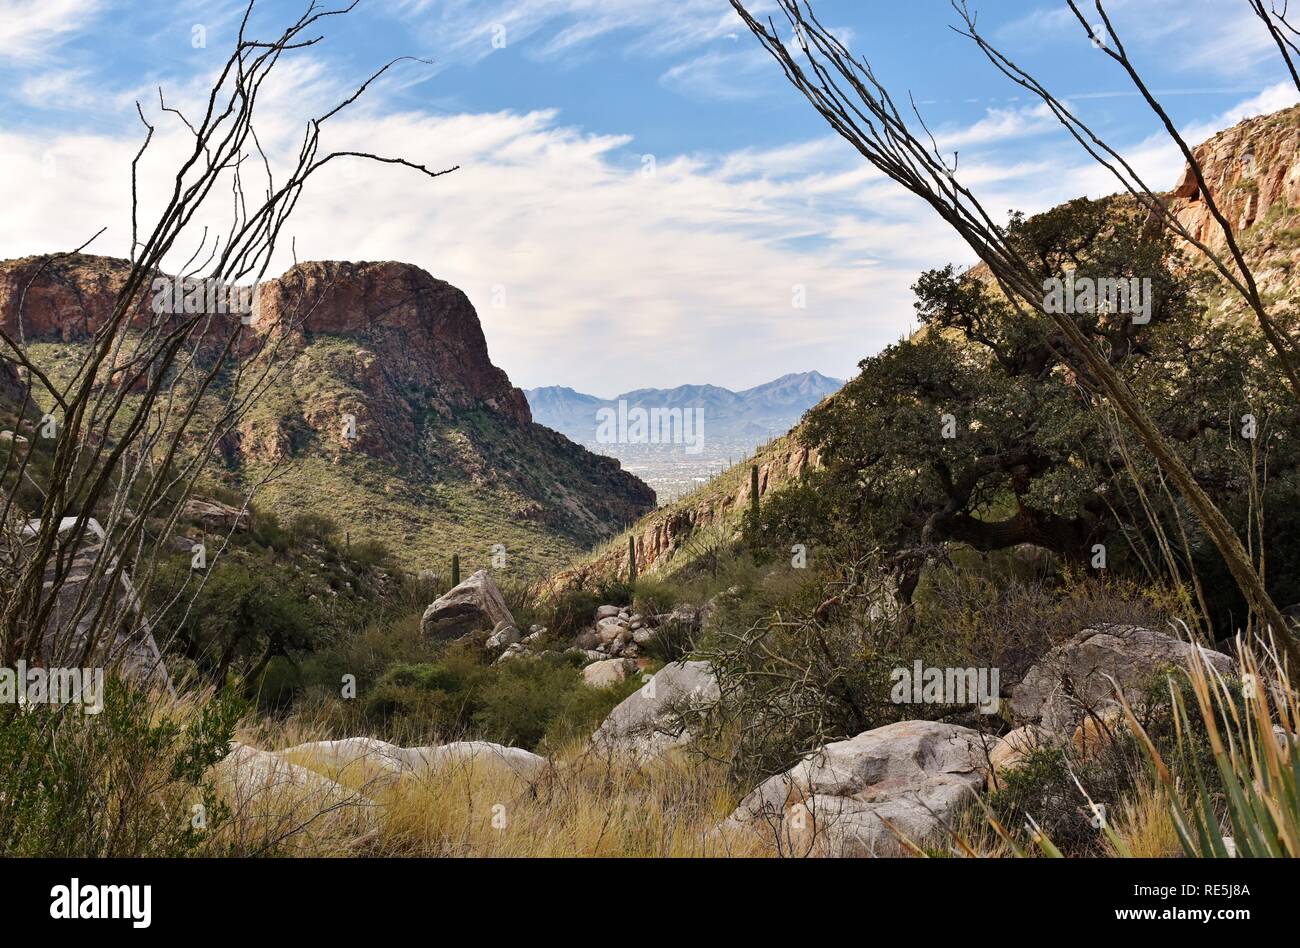 Pima Canyon Trail in Coronado National Forest. The Santa Catalina Mountains can be seen, with Tucson, Arizona in the distance. Stock Photo